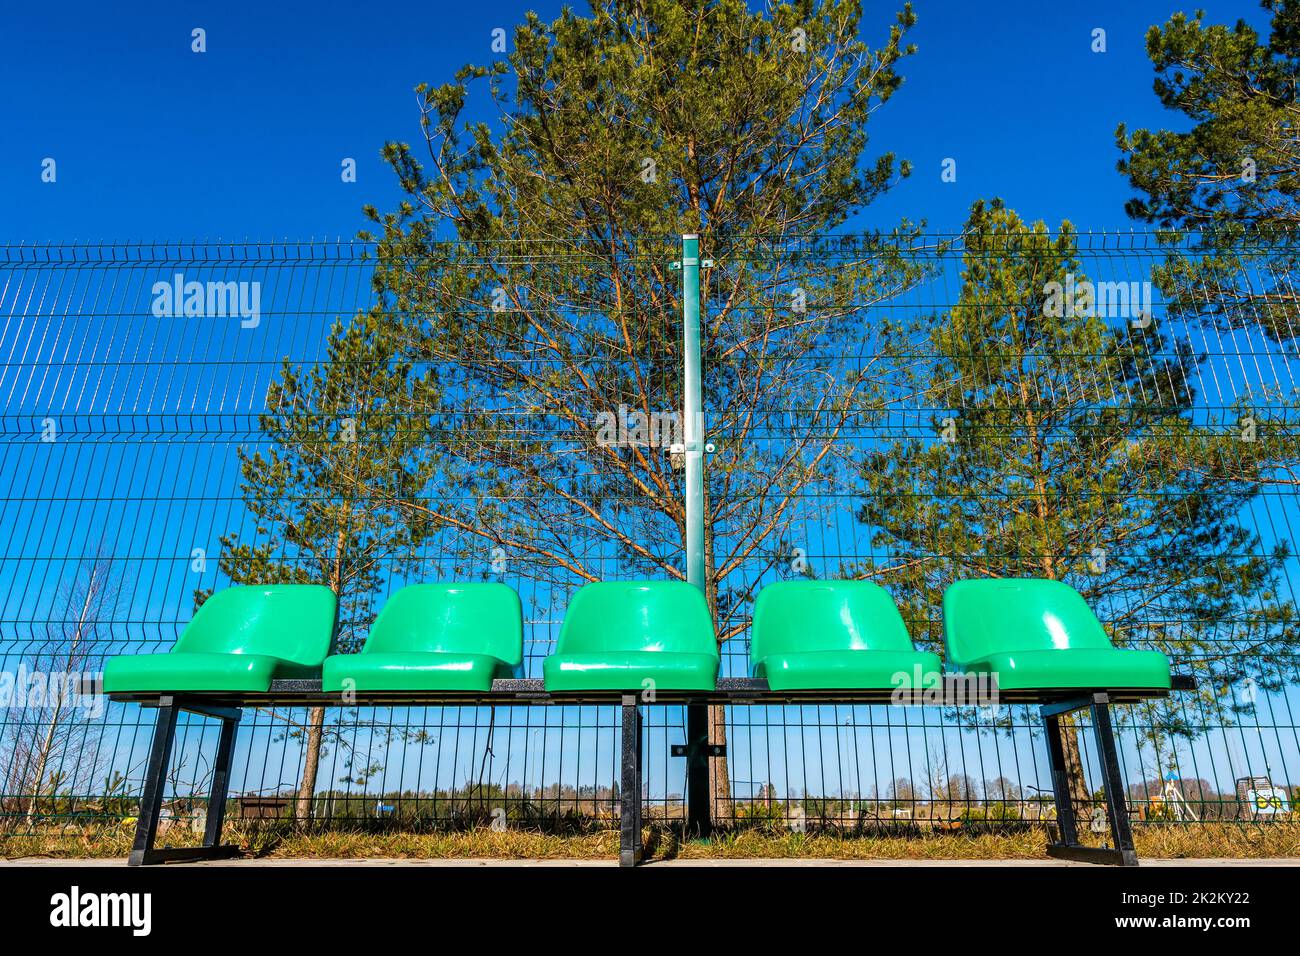 Plastic chairs in the basketball court from a low angle Stock Photo